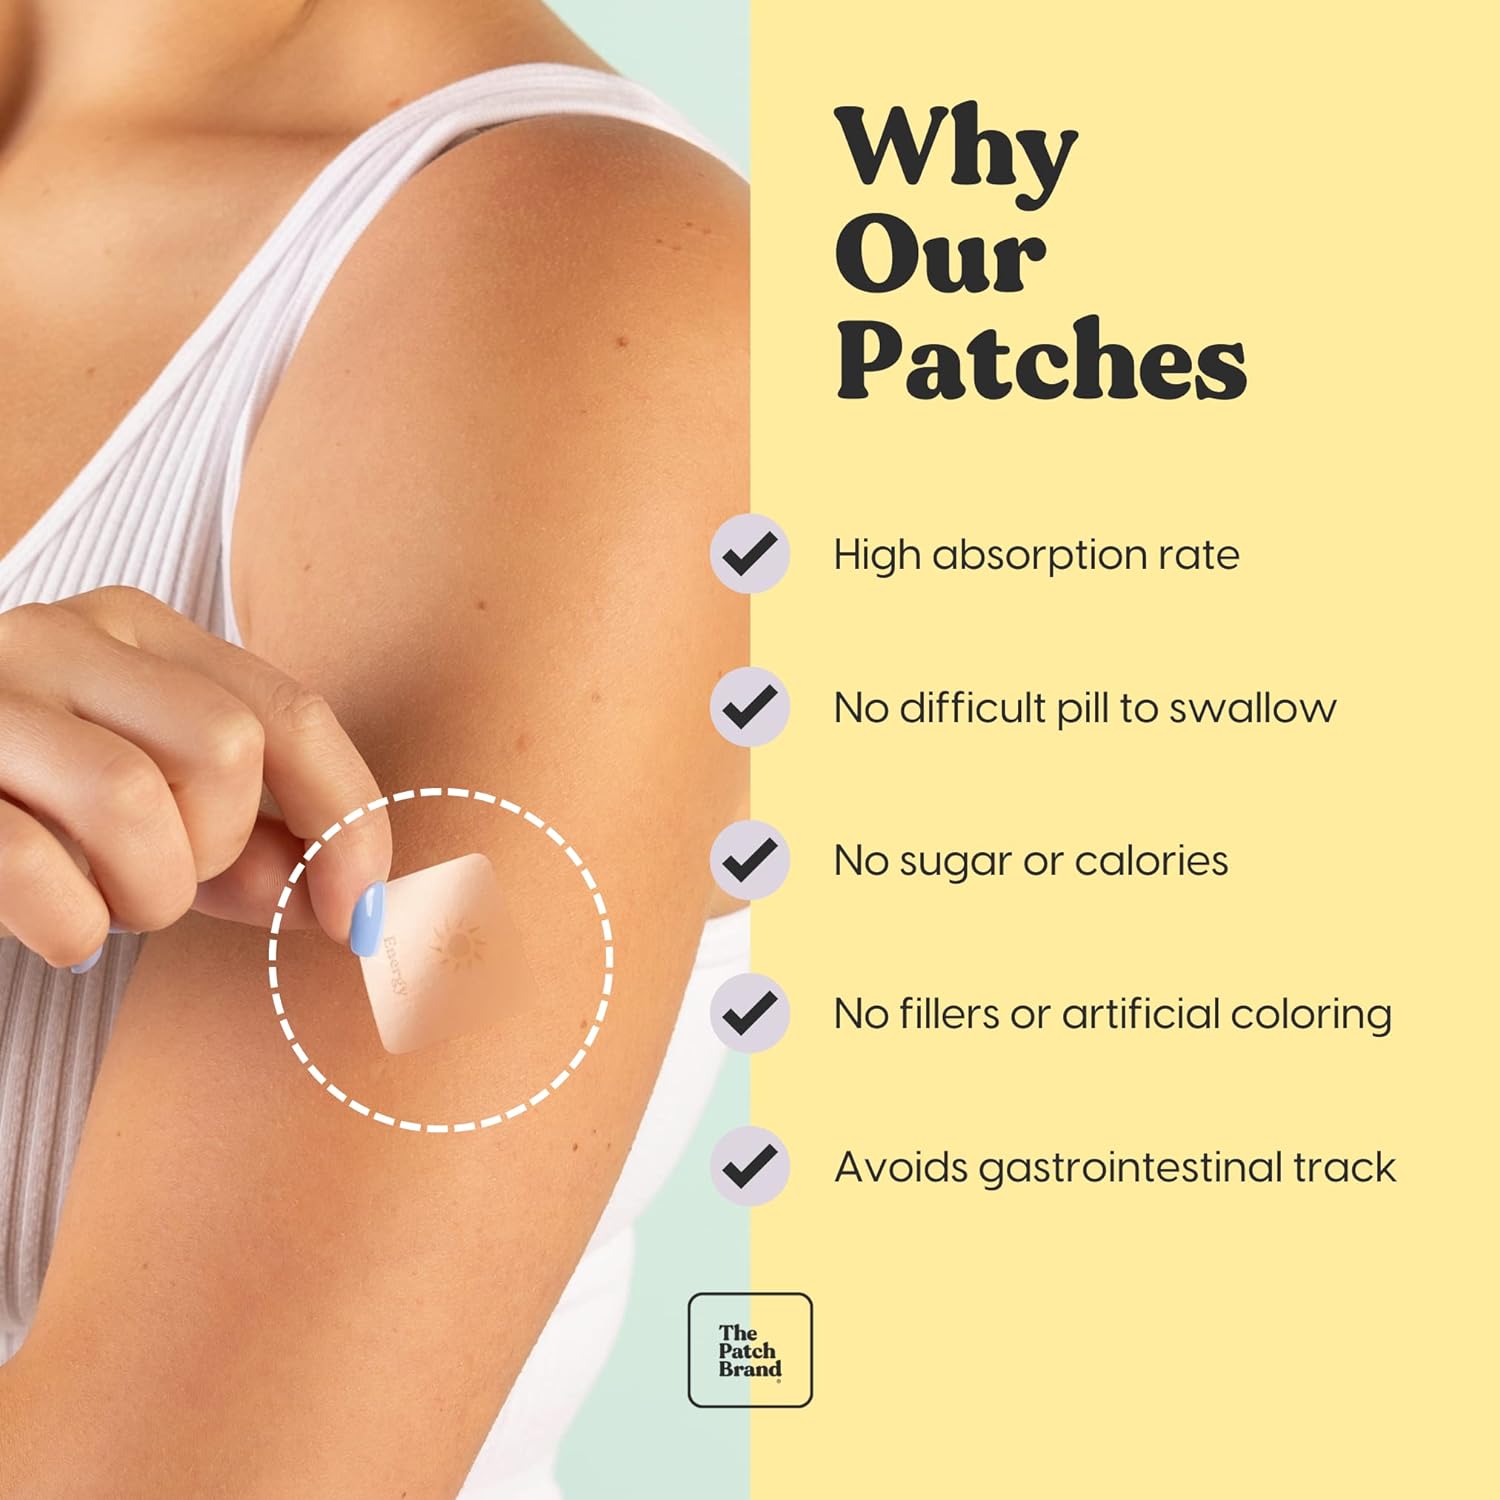 The Patch Brand Energy Patches | Supports Energy with Caffeine and B5 and B3 | All Natural Vitamins  Mineral Patch Plant Based and Cruelty Free Water Resistant Patches That Last All Day